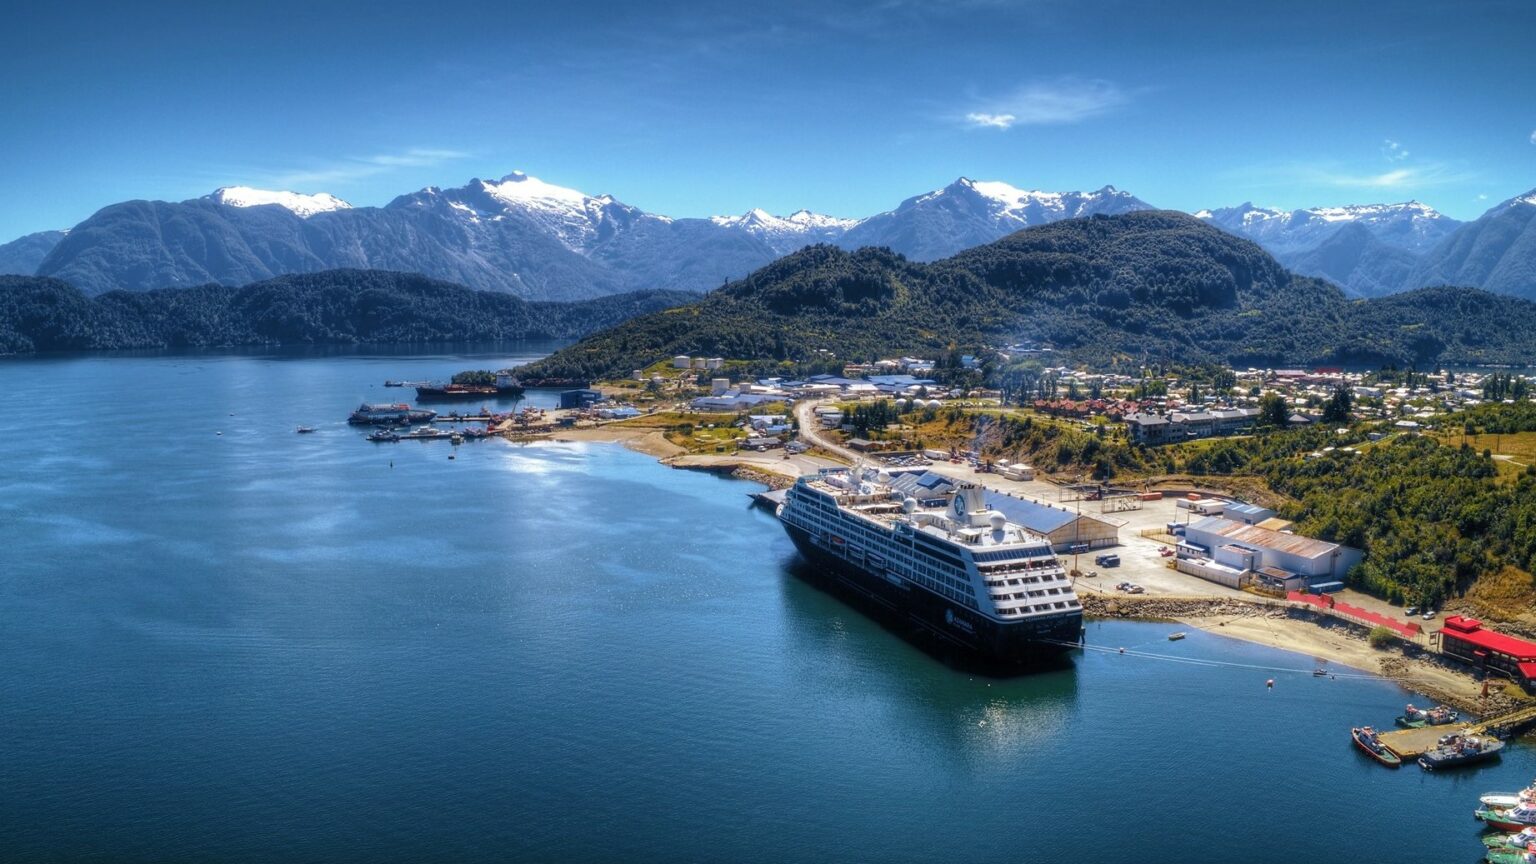 All aboard Azamara, the boutique cruise line and leader in Destination